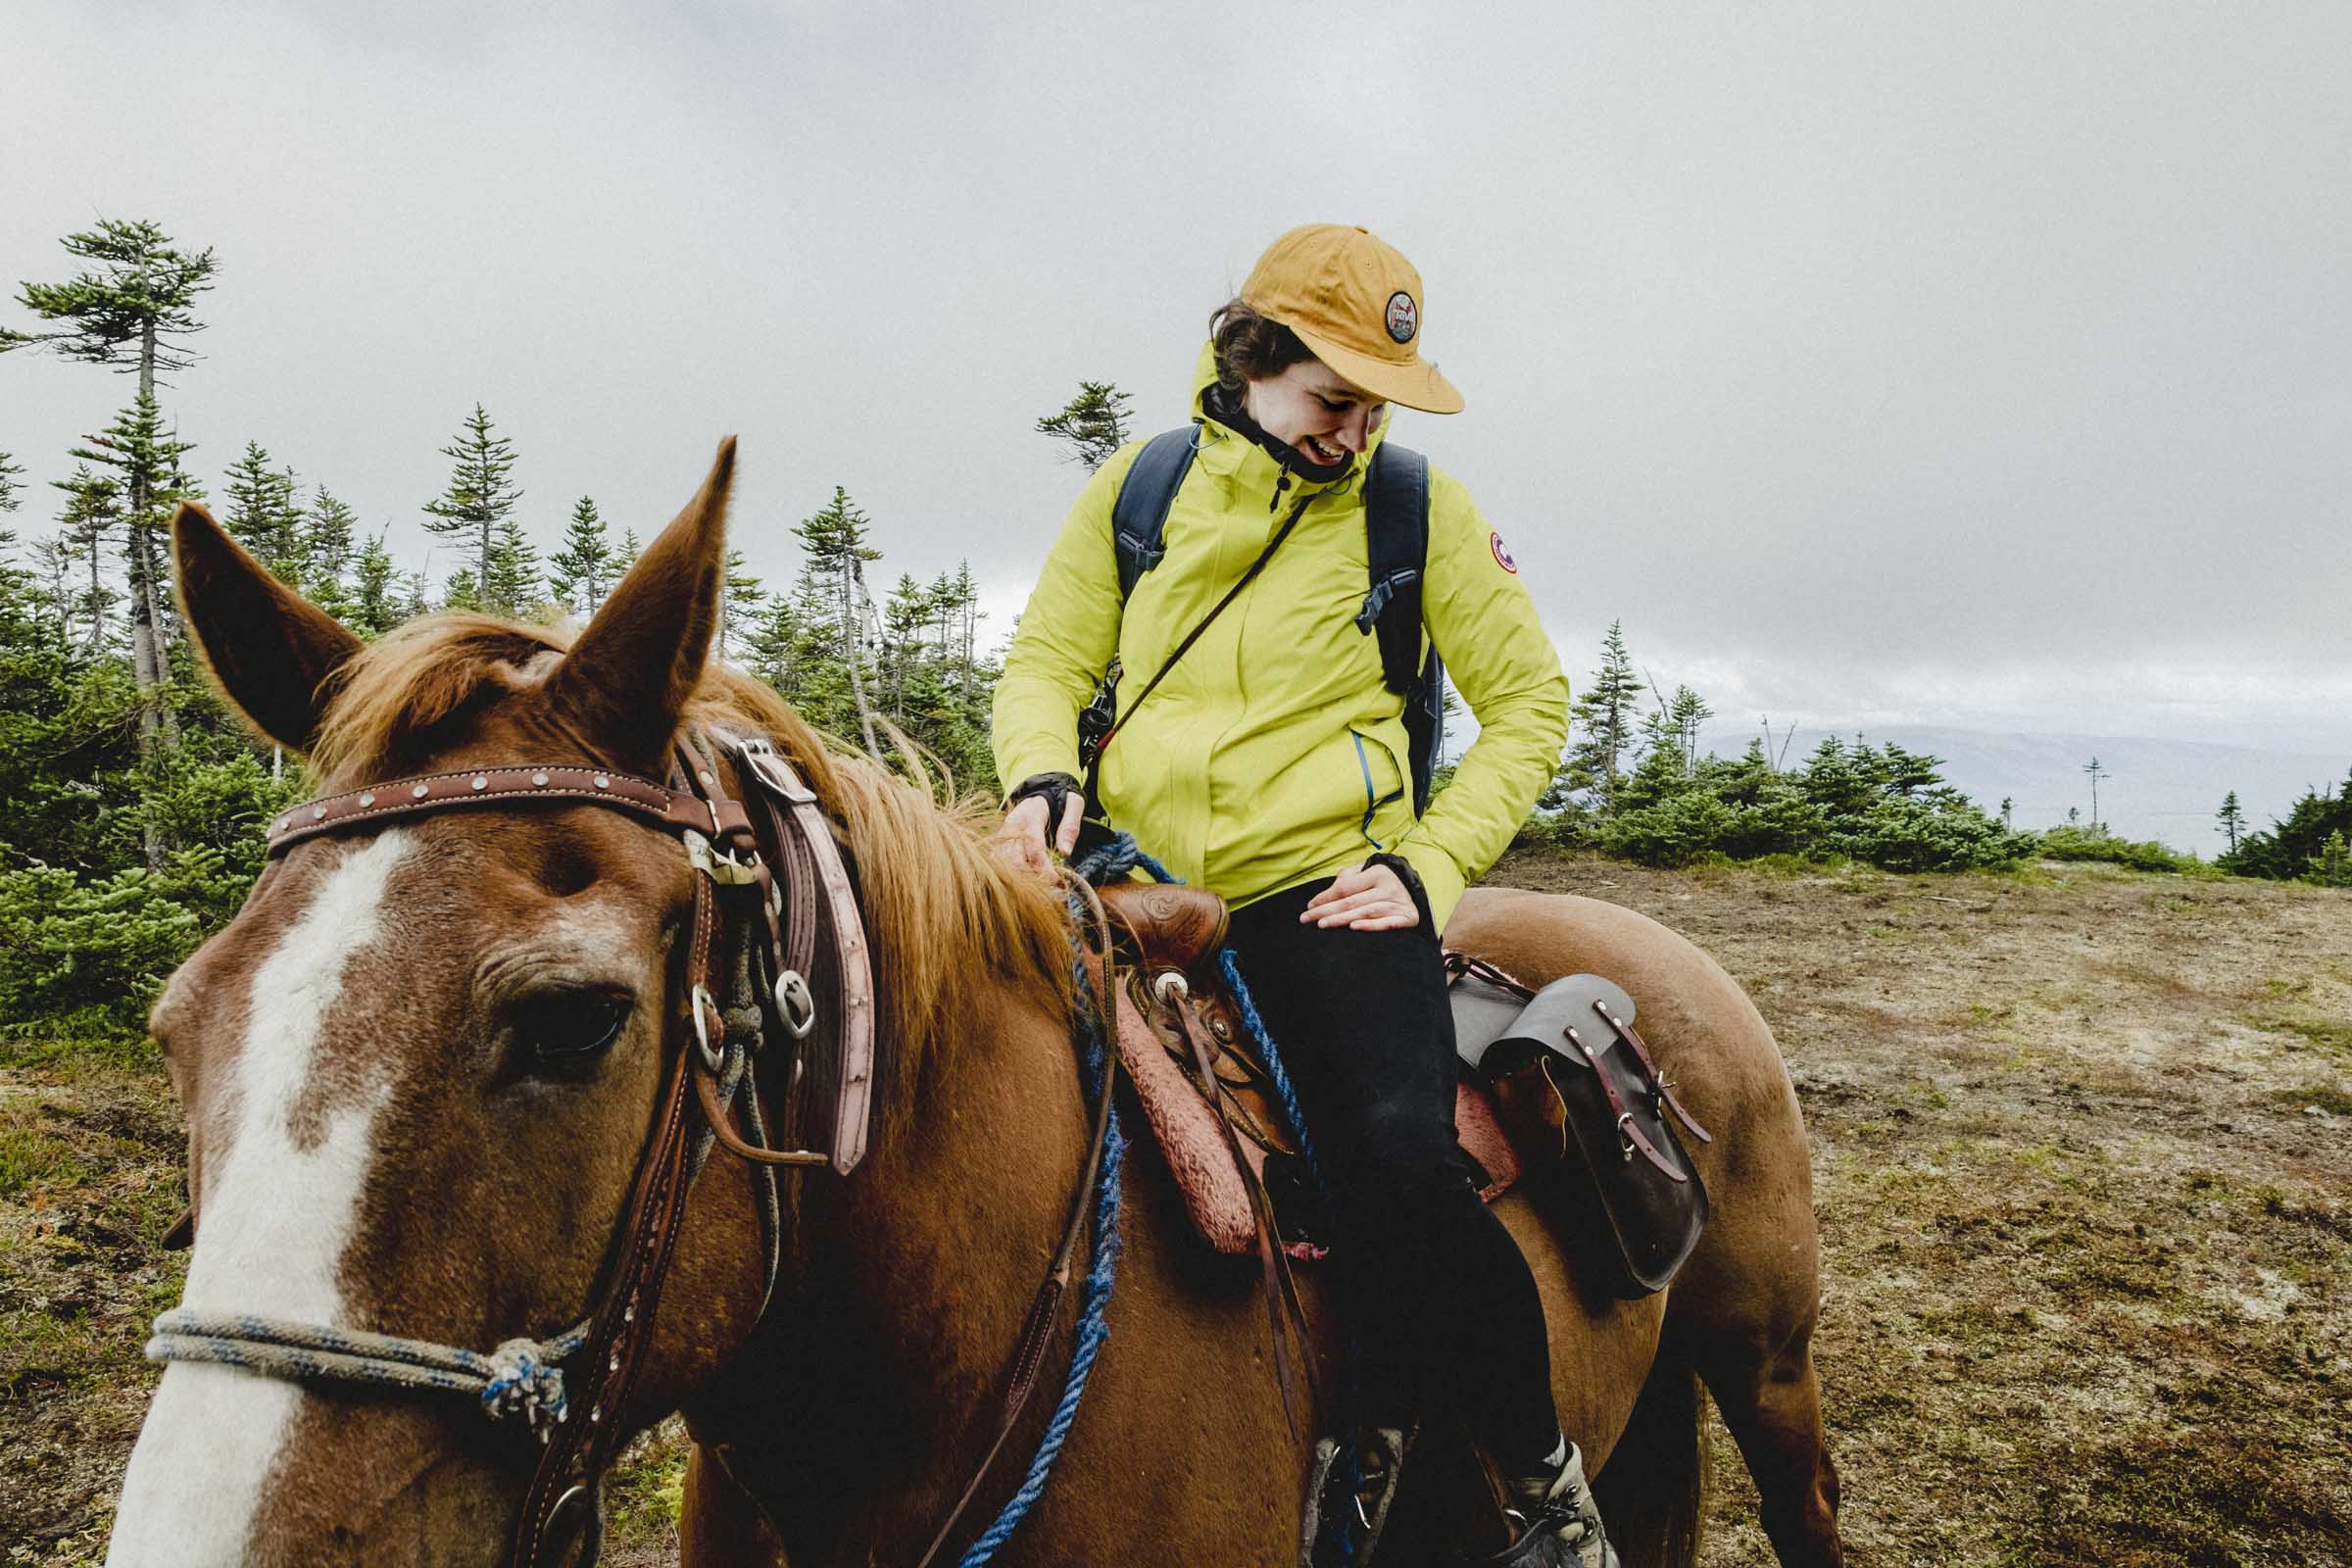 Megan horseback riding in the mountains of Northern BC